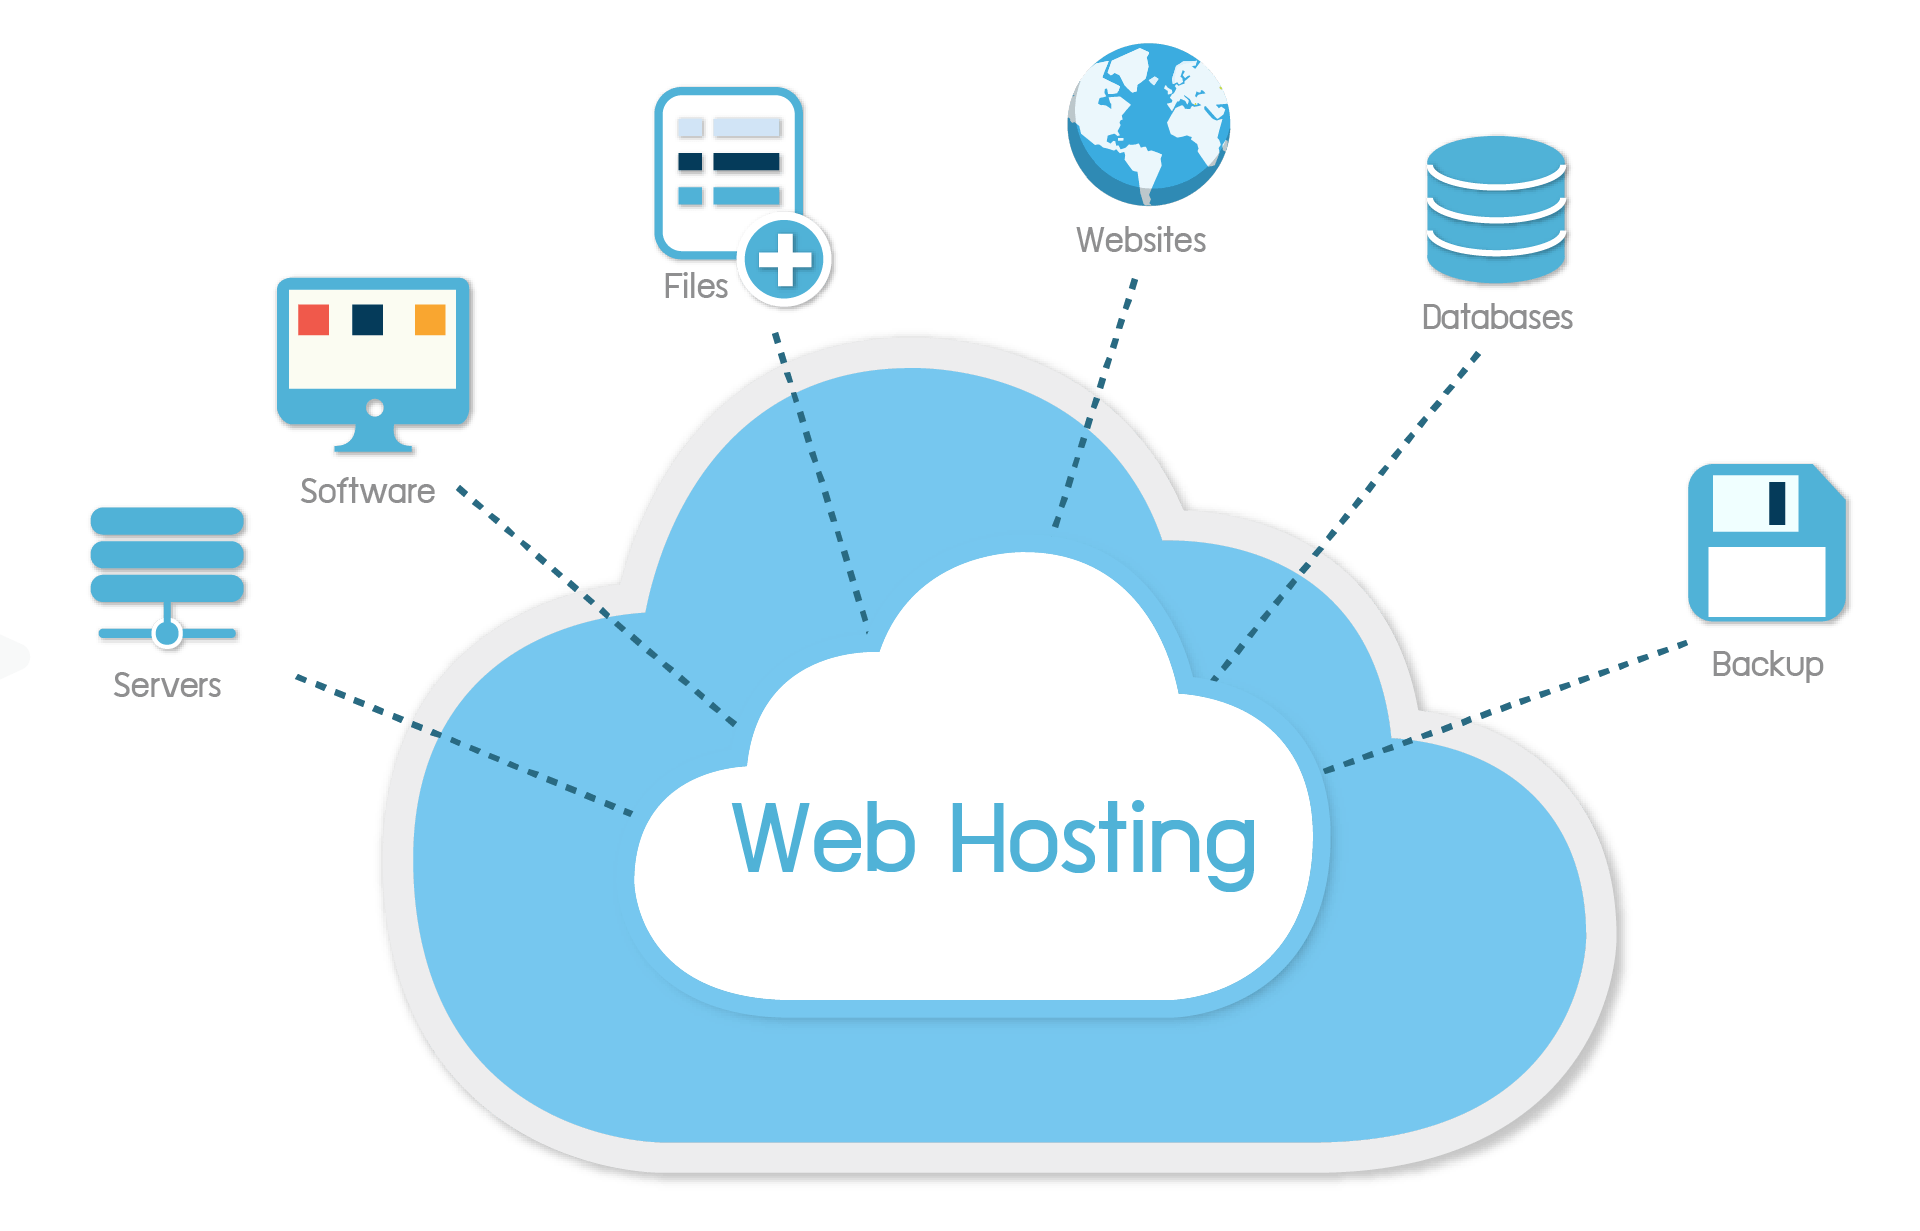 Web Hosting Services Market Trends, Scope, Demand, Opportunity and Forecast 2022-2027